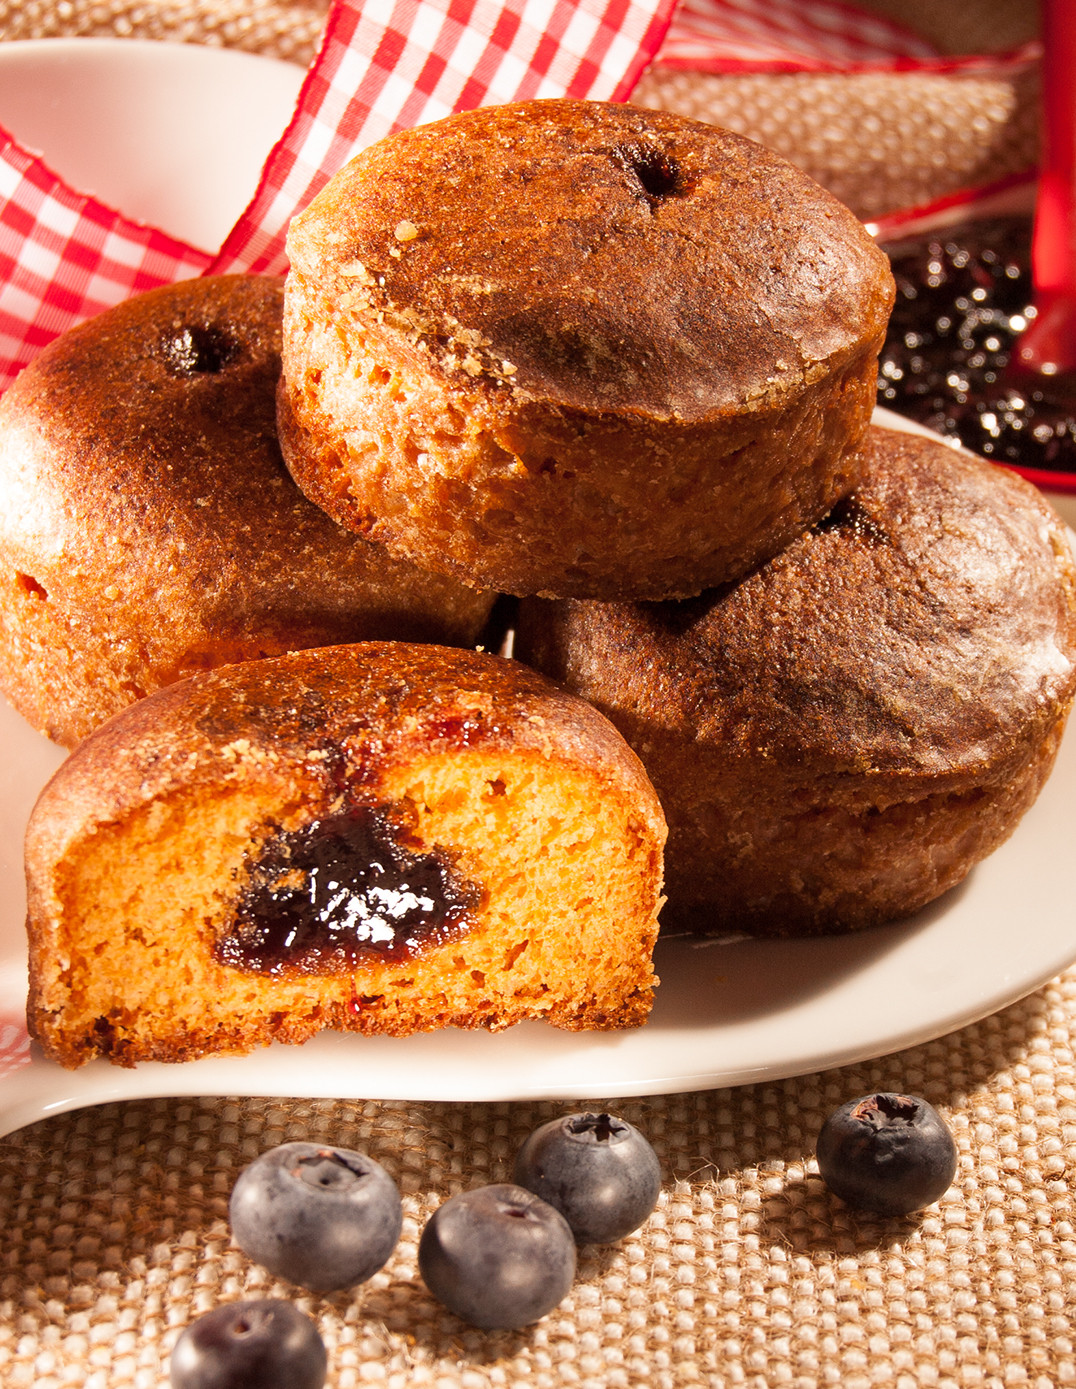 6 Nonnette honey cakes with blueberry filling